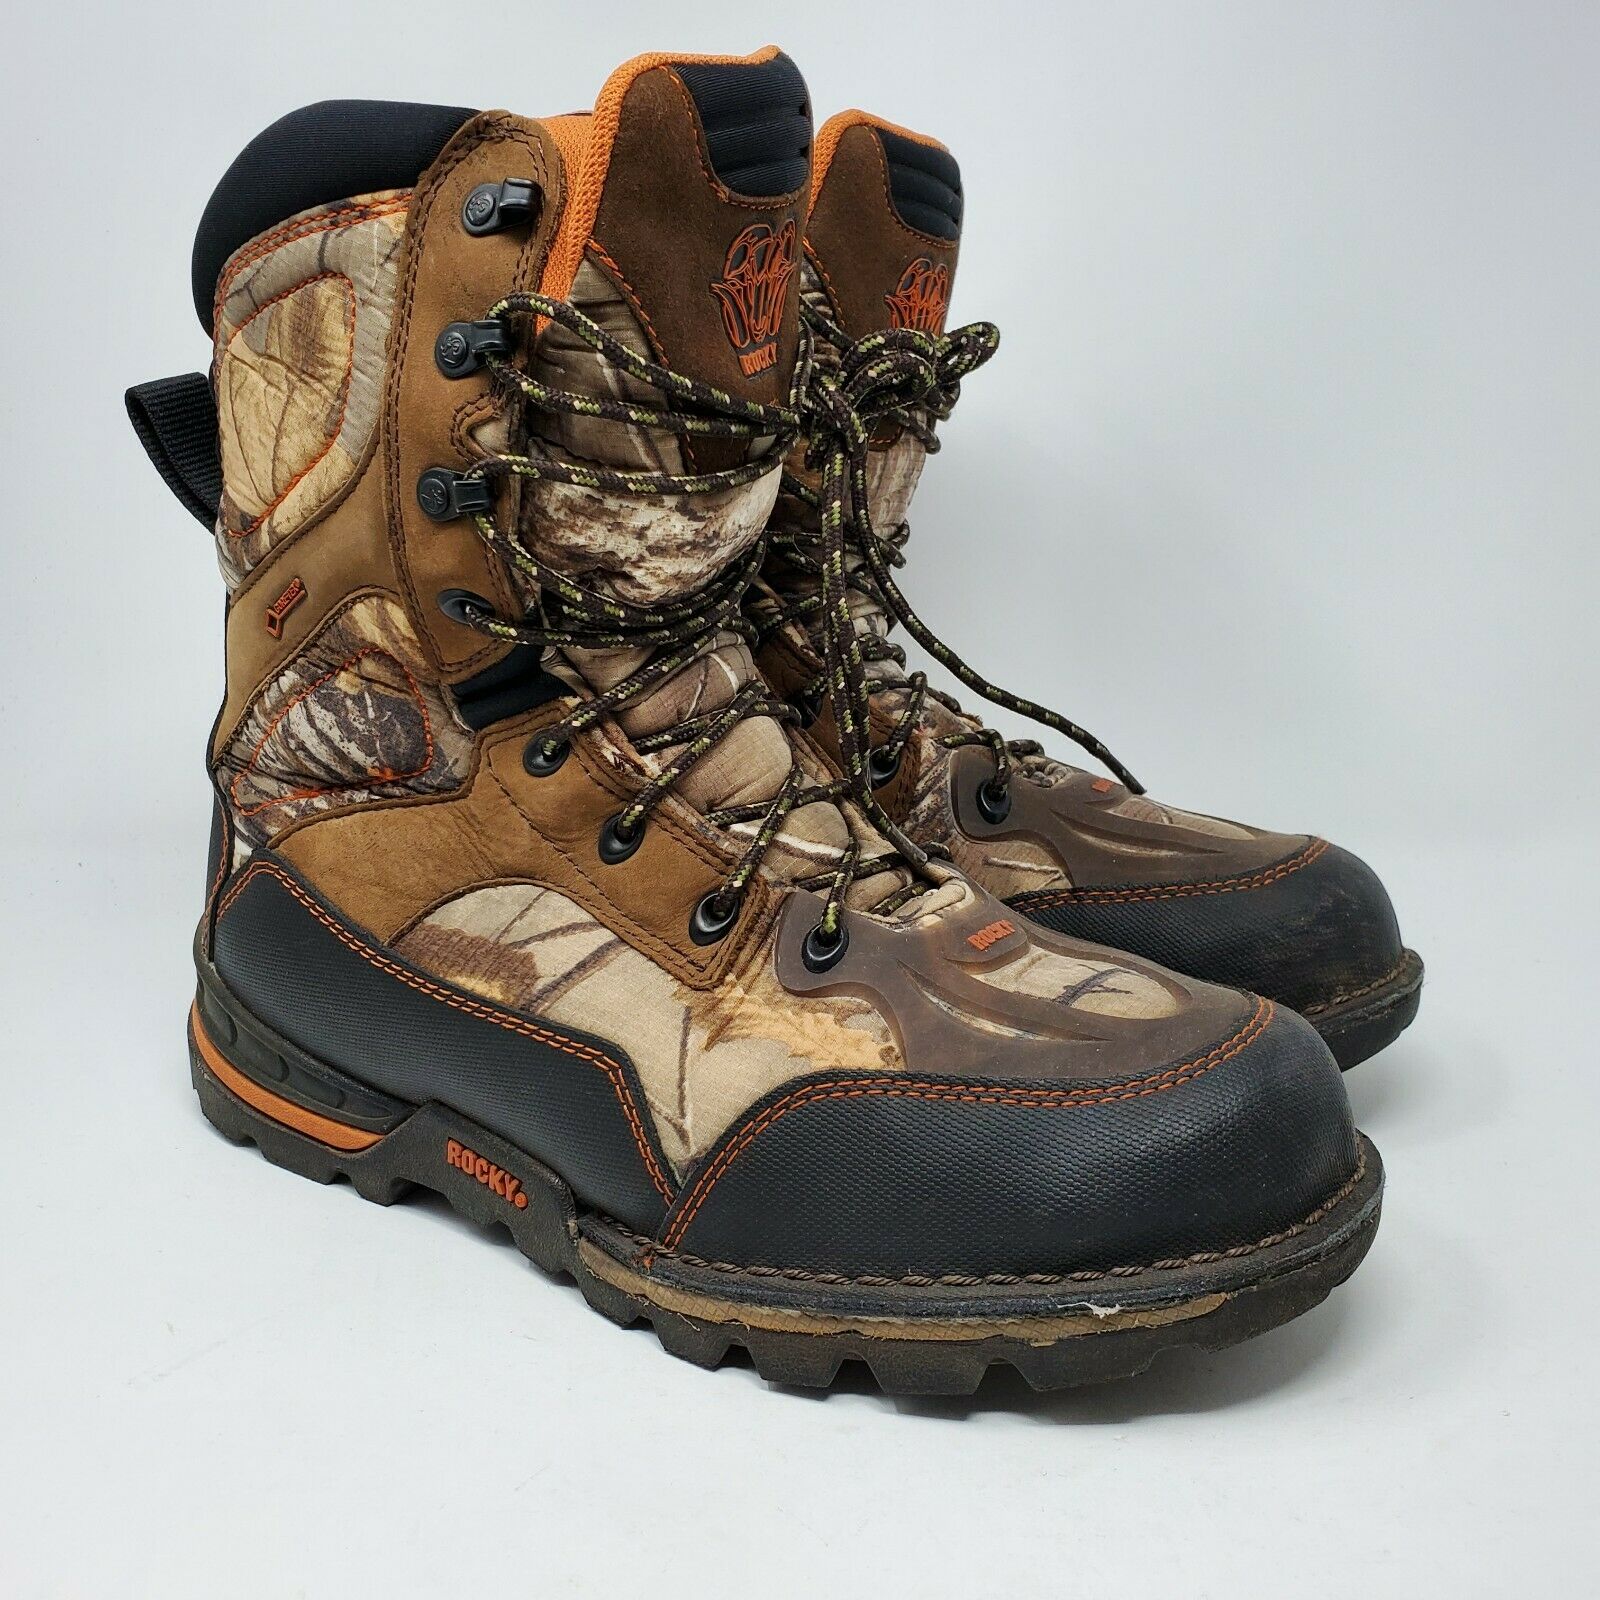 Rocky 1000 Gram Thinsulate Hunting Boots - Goretex Men’s Size 8.5 Wide